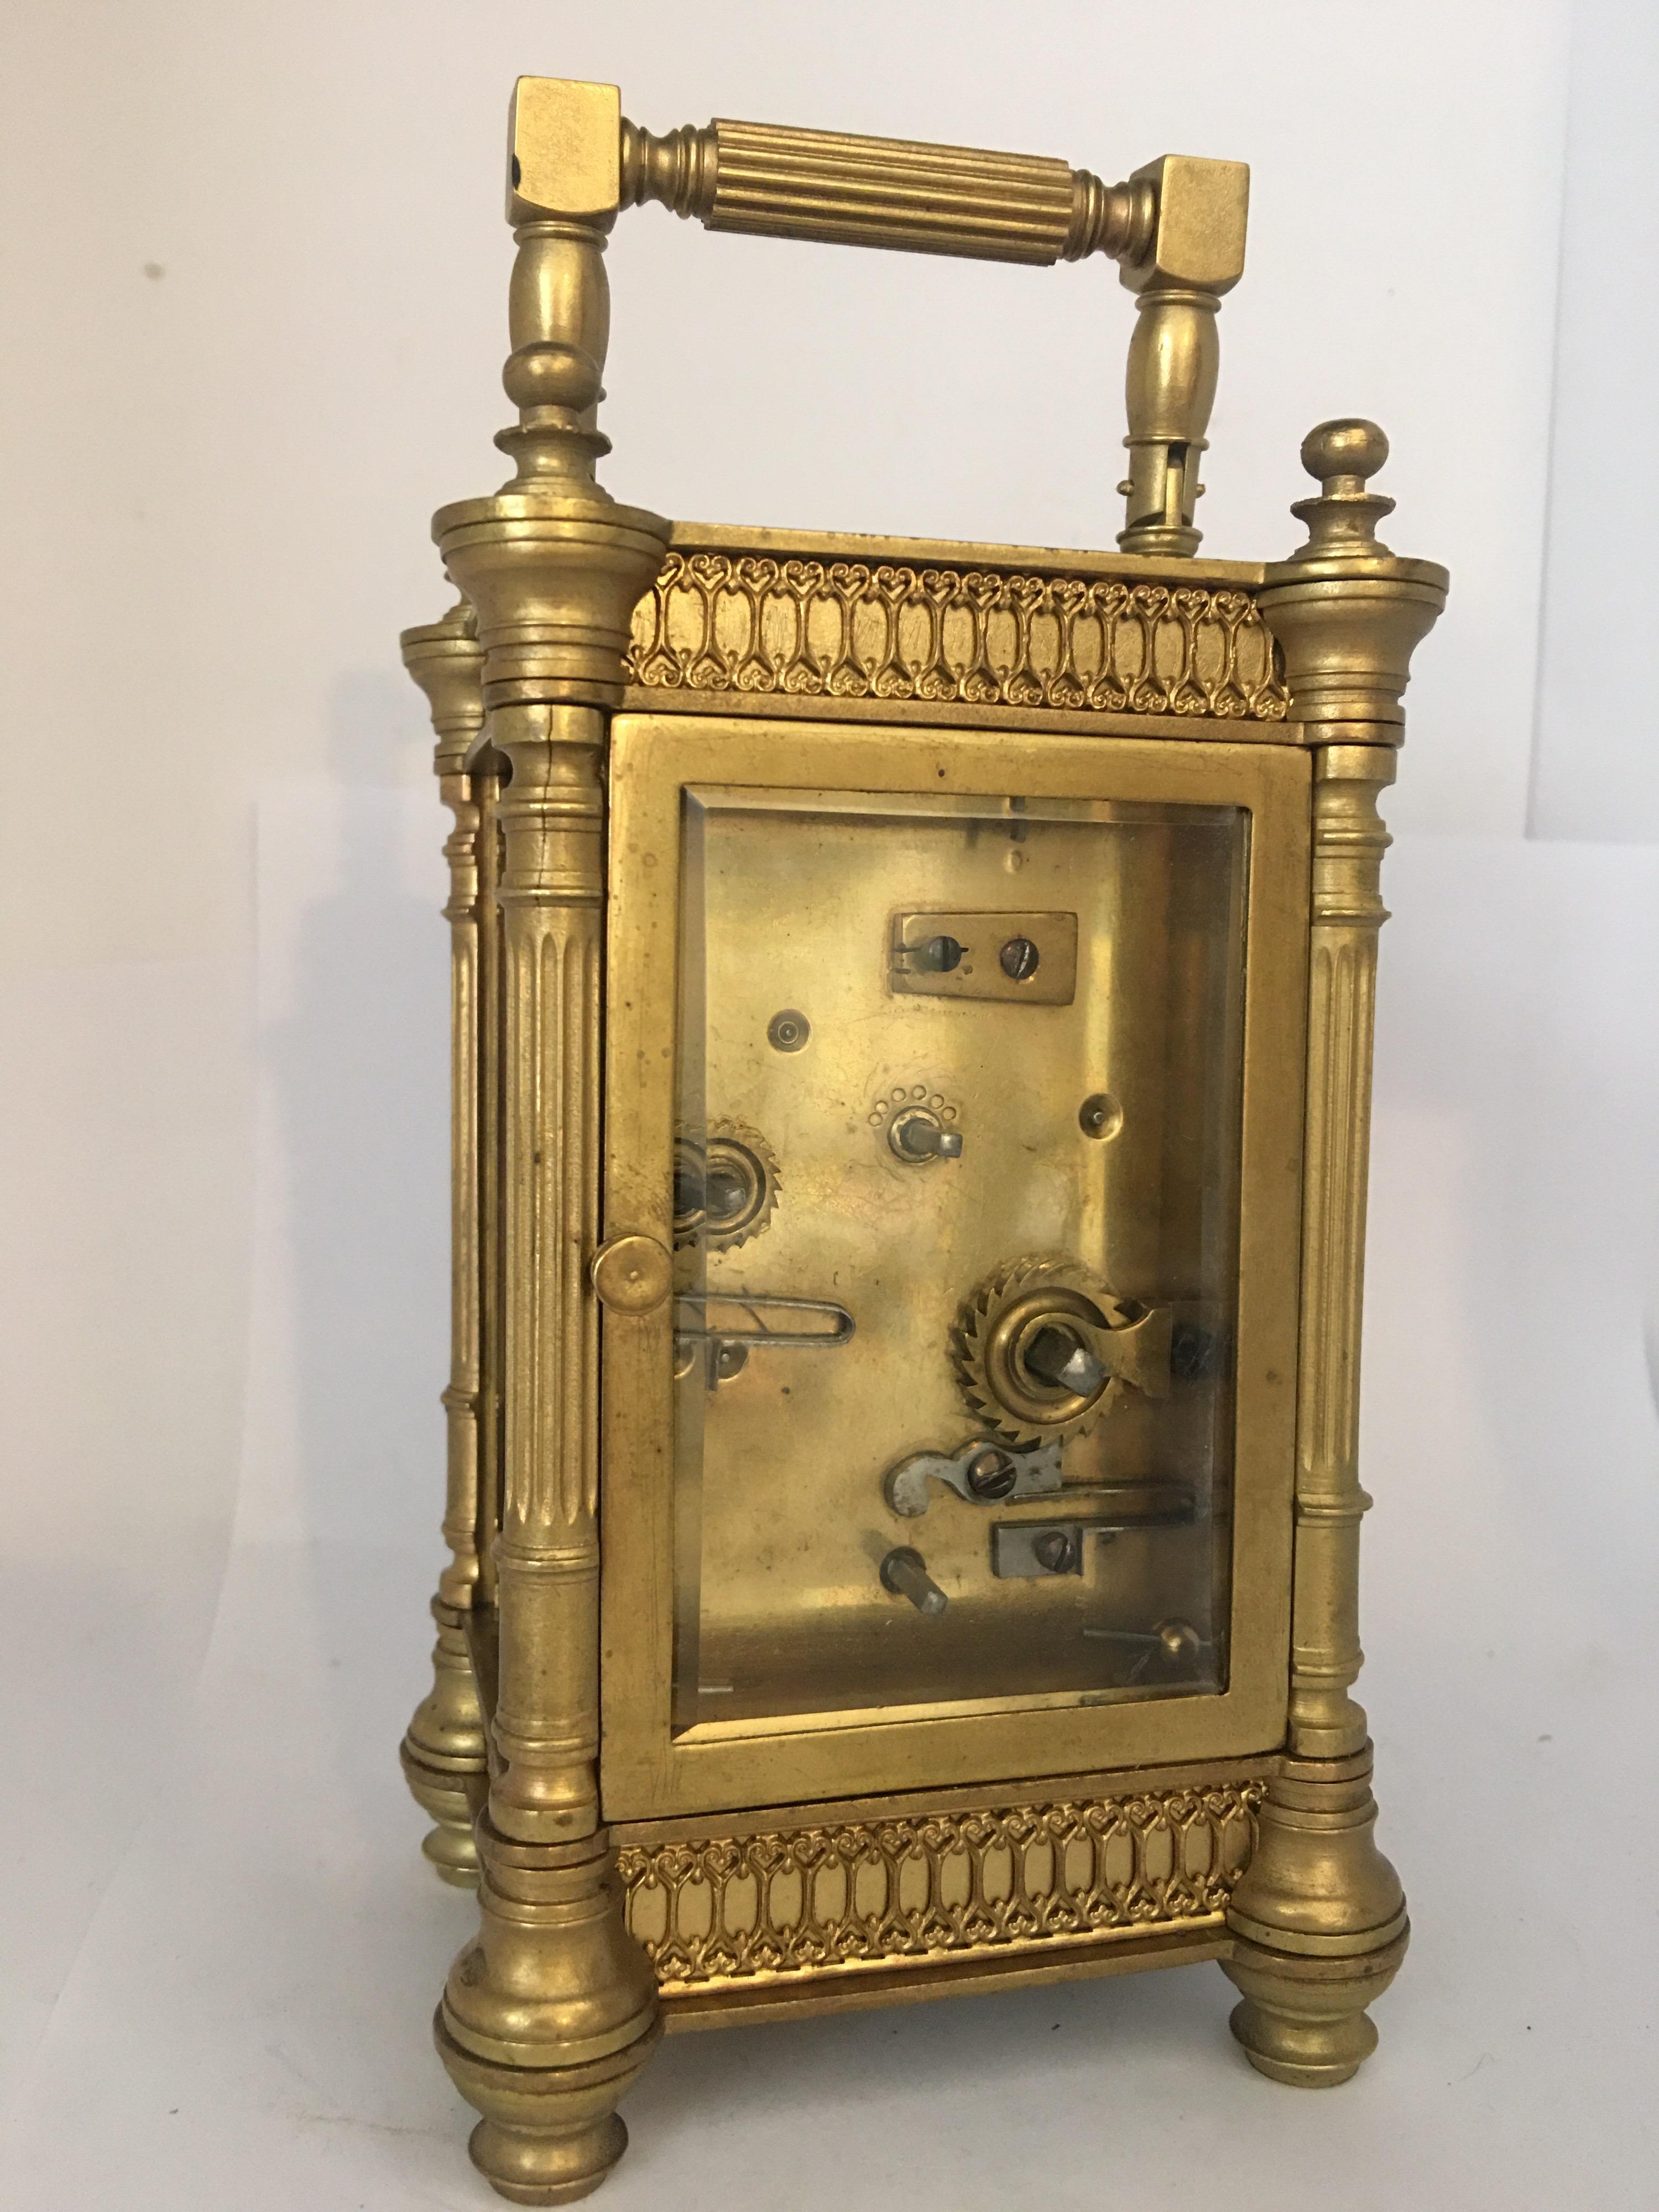 A 19th century French carriage clock with a striking alarm and plated in filigree decoration. With thick bevel edge glass panels.

The image forms part of the description.